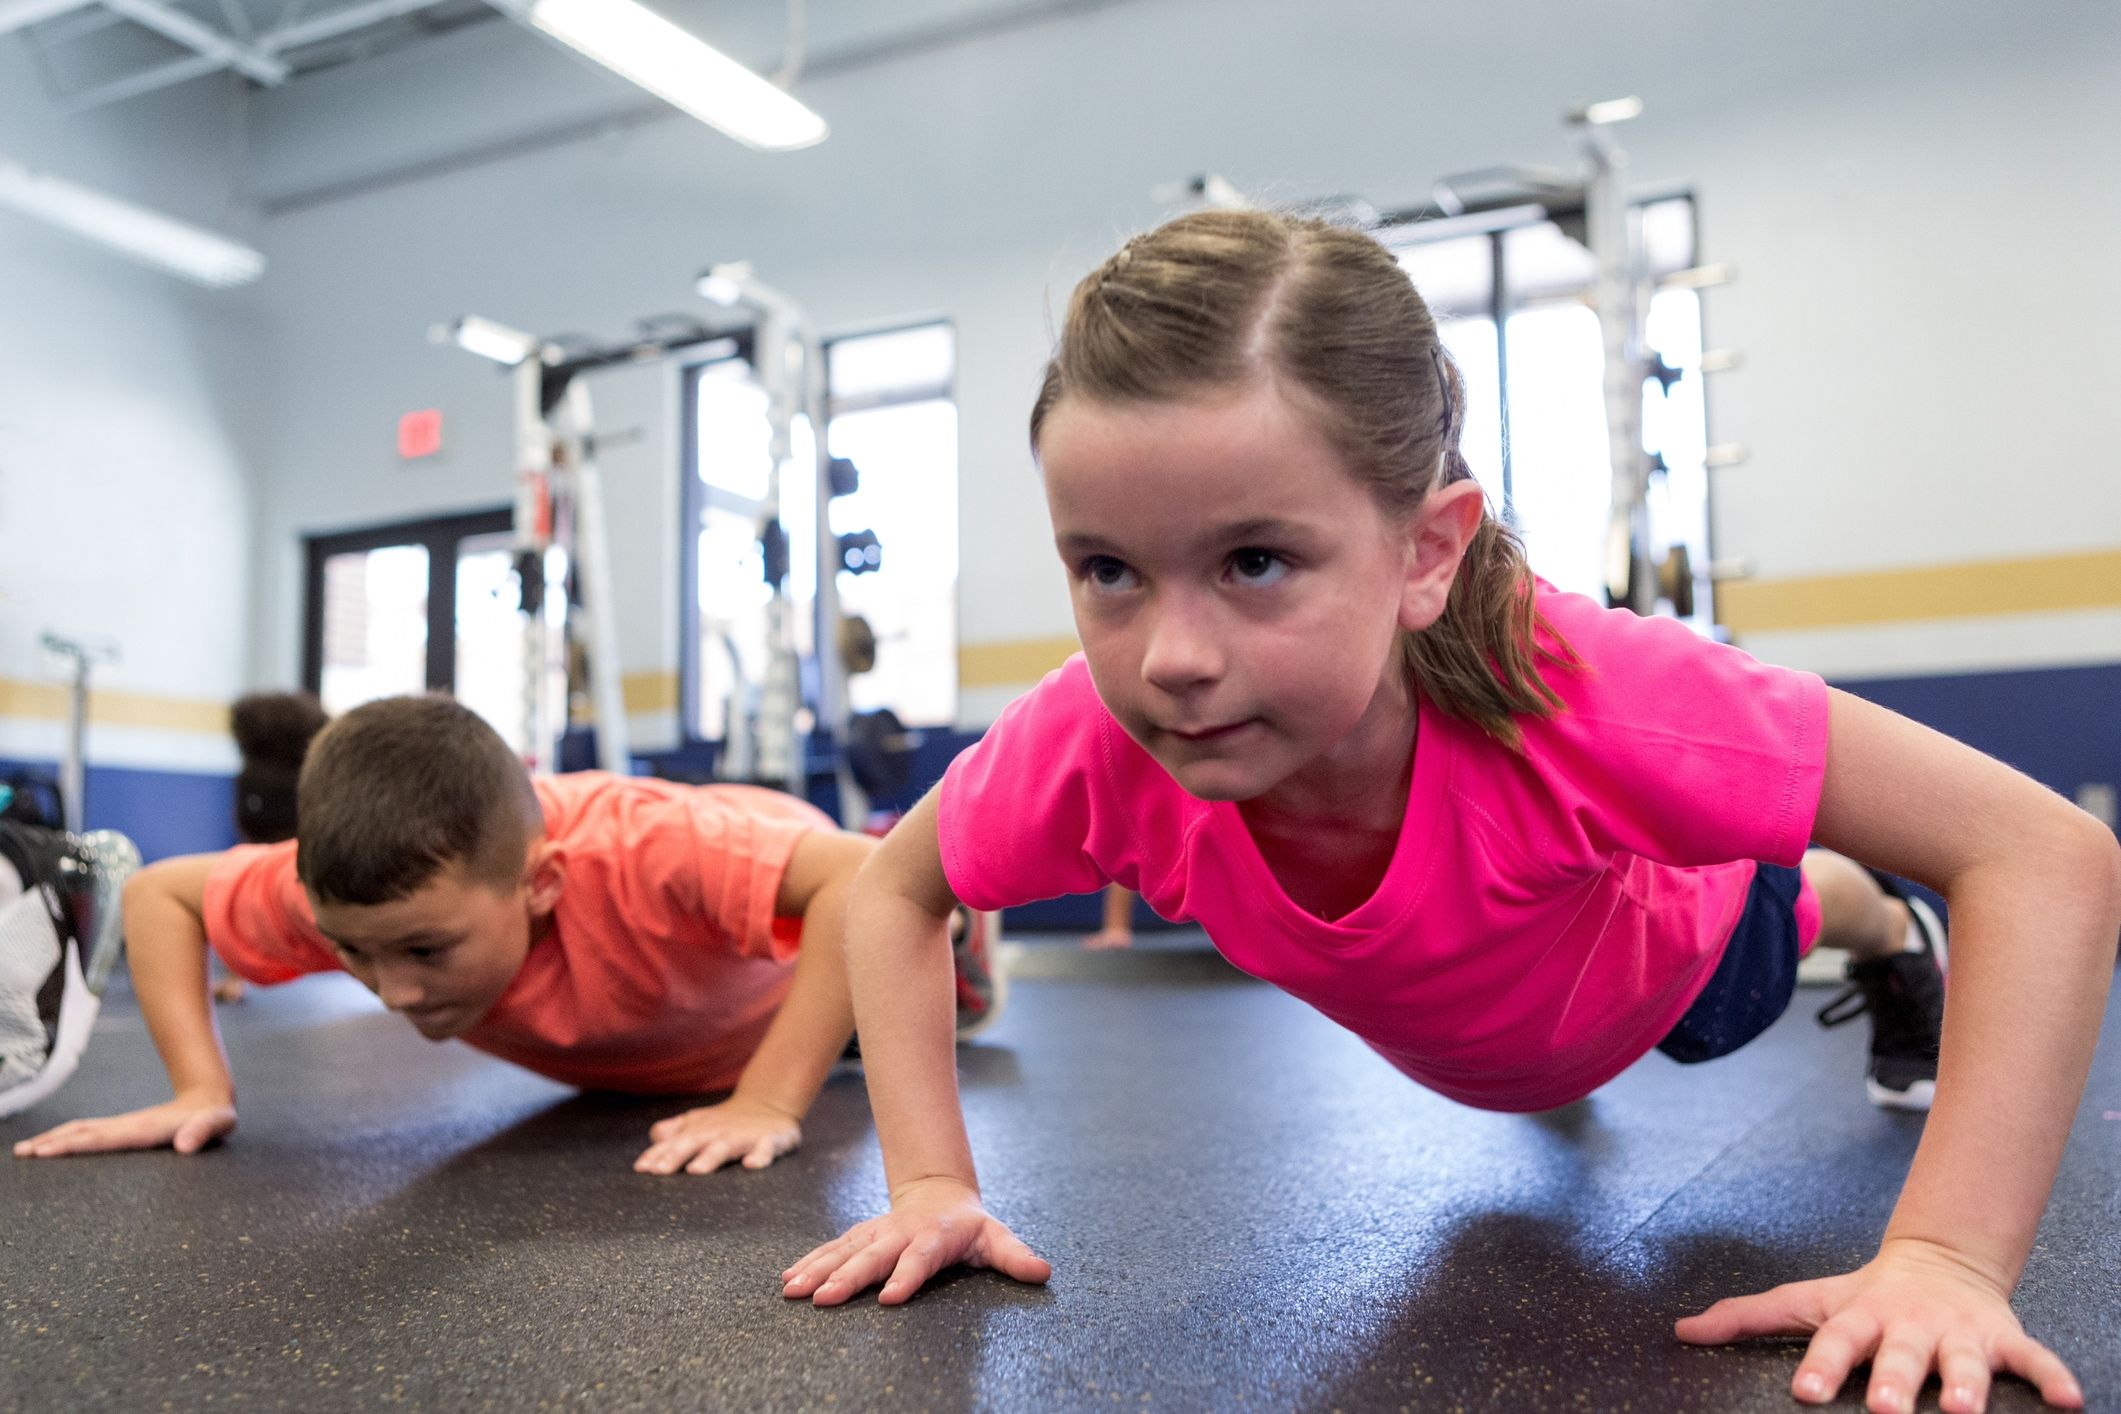 Strength Training for Kids - Why, When, and How